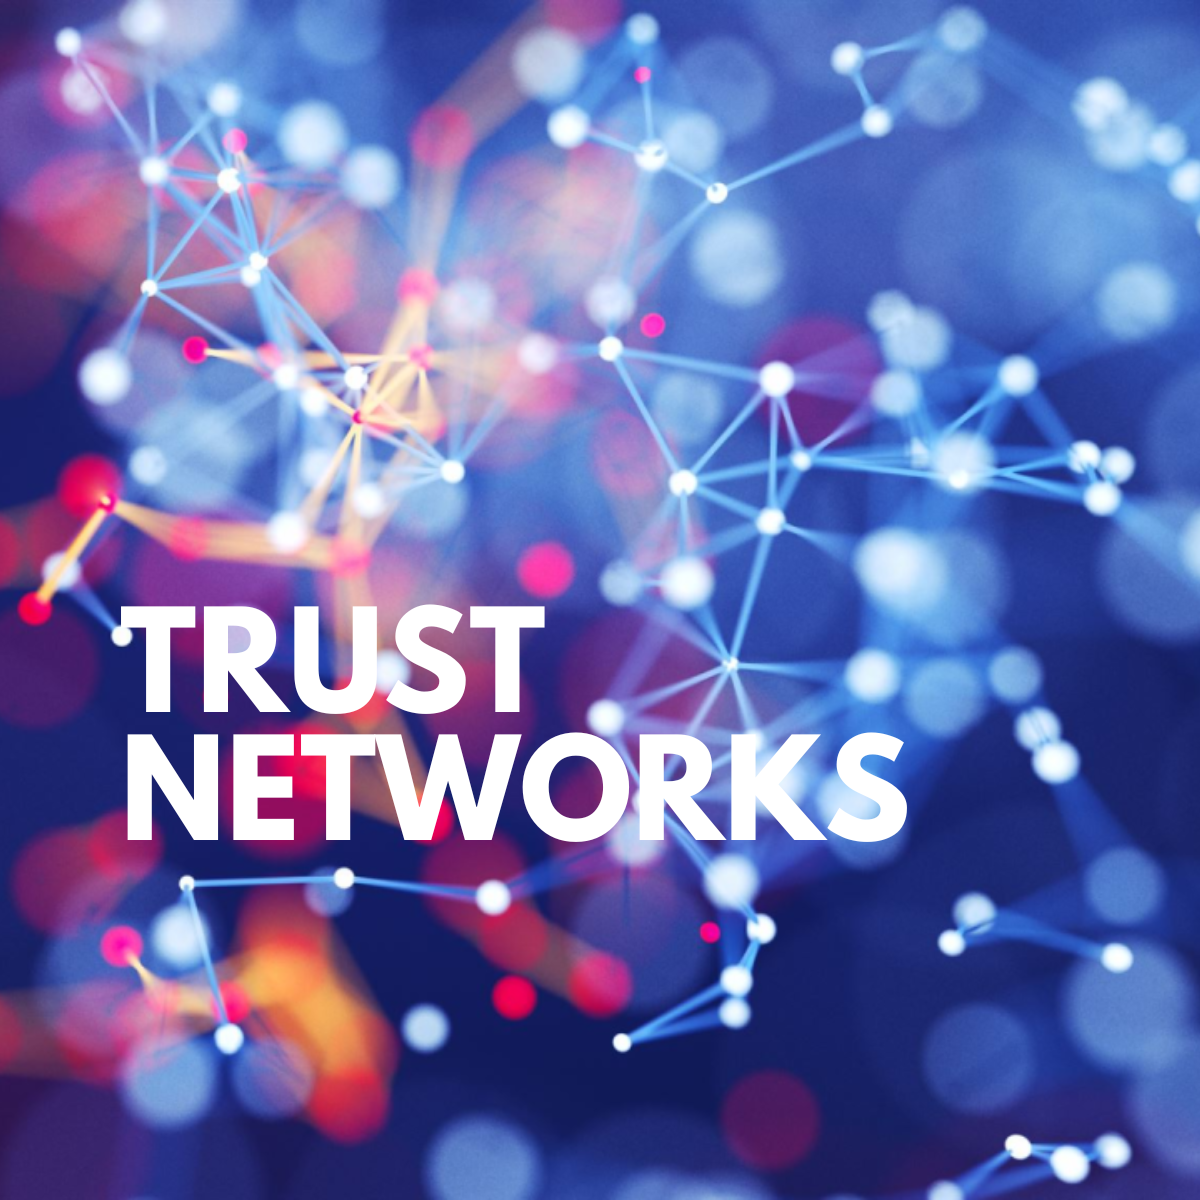 TRUST NETWORKS